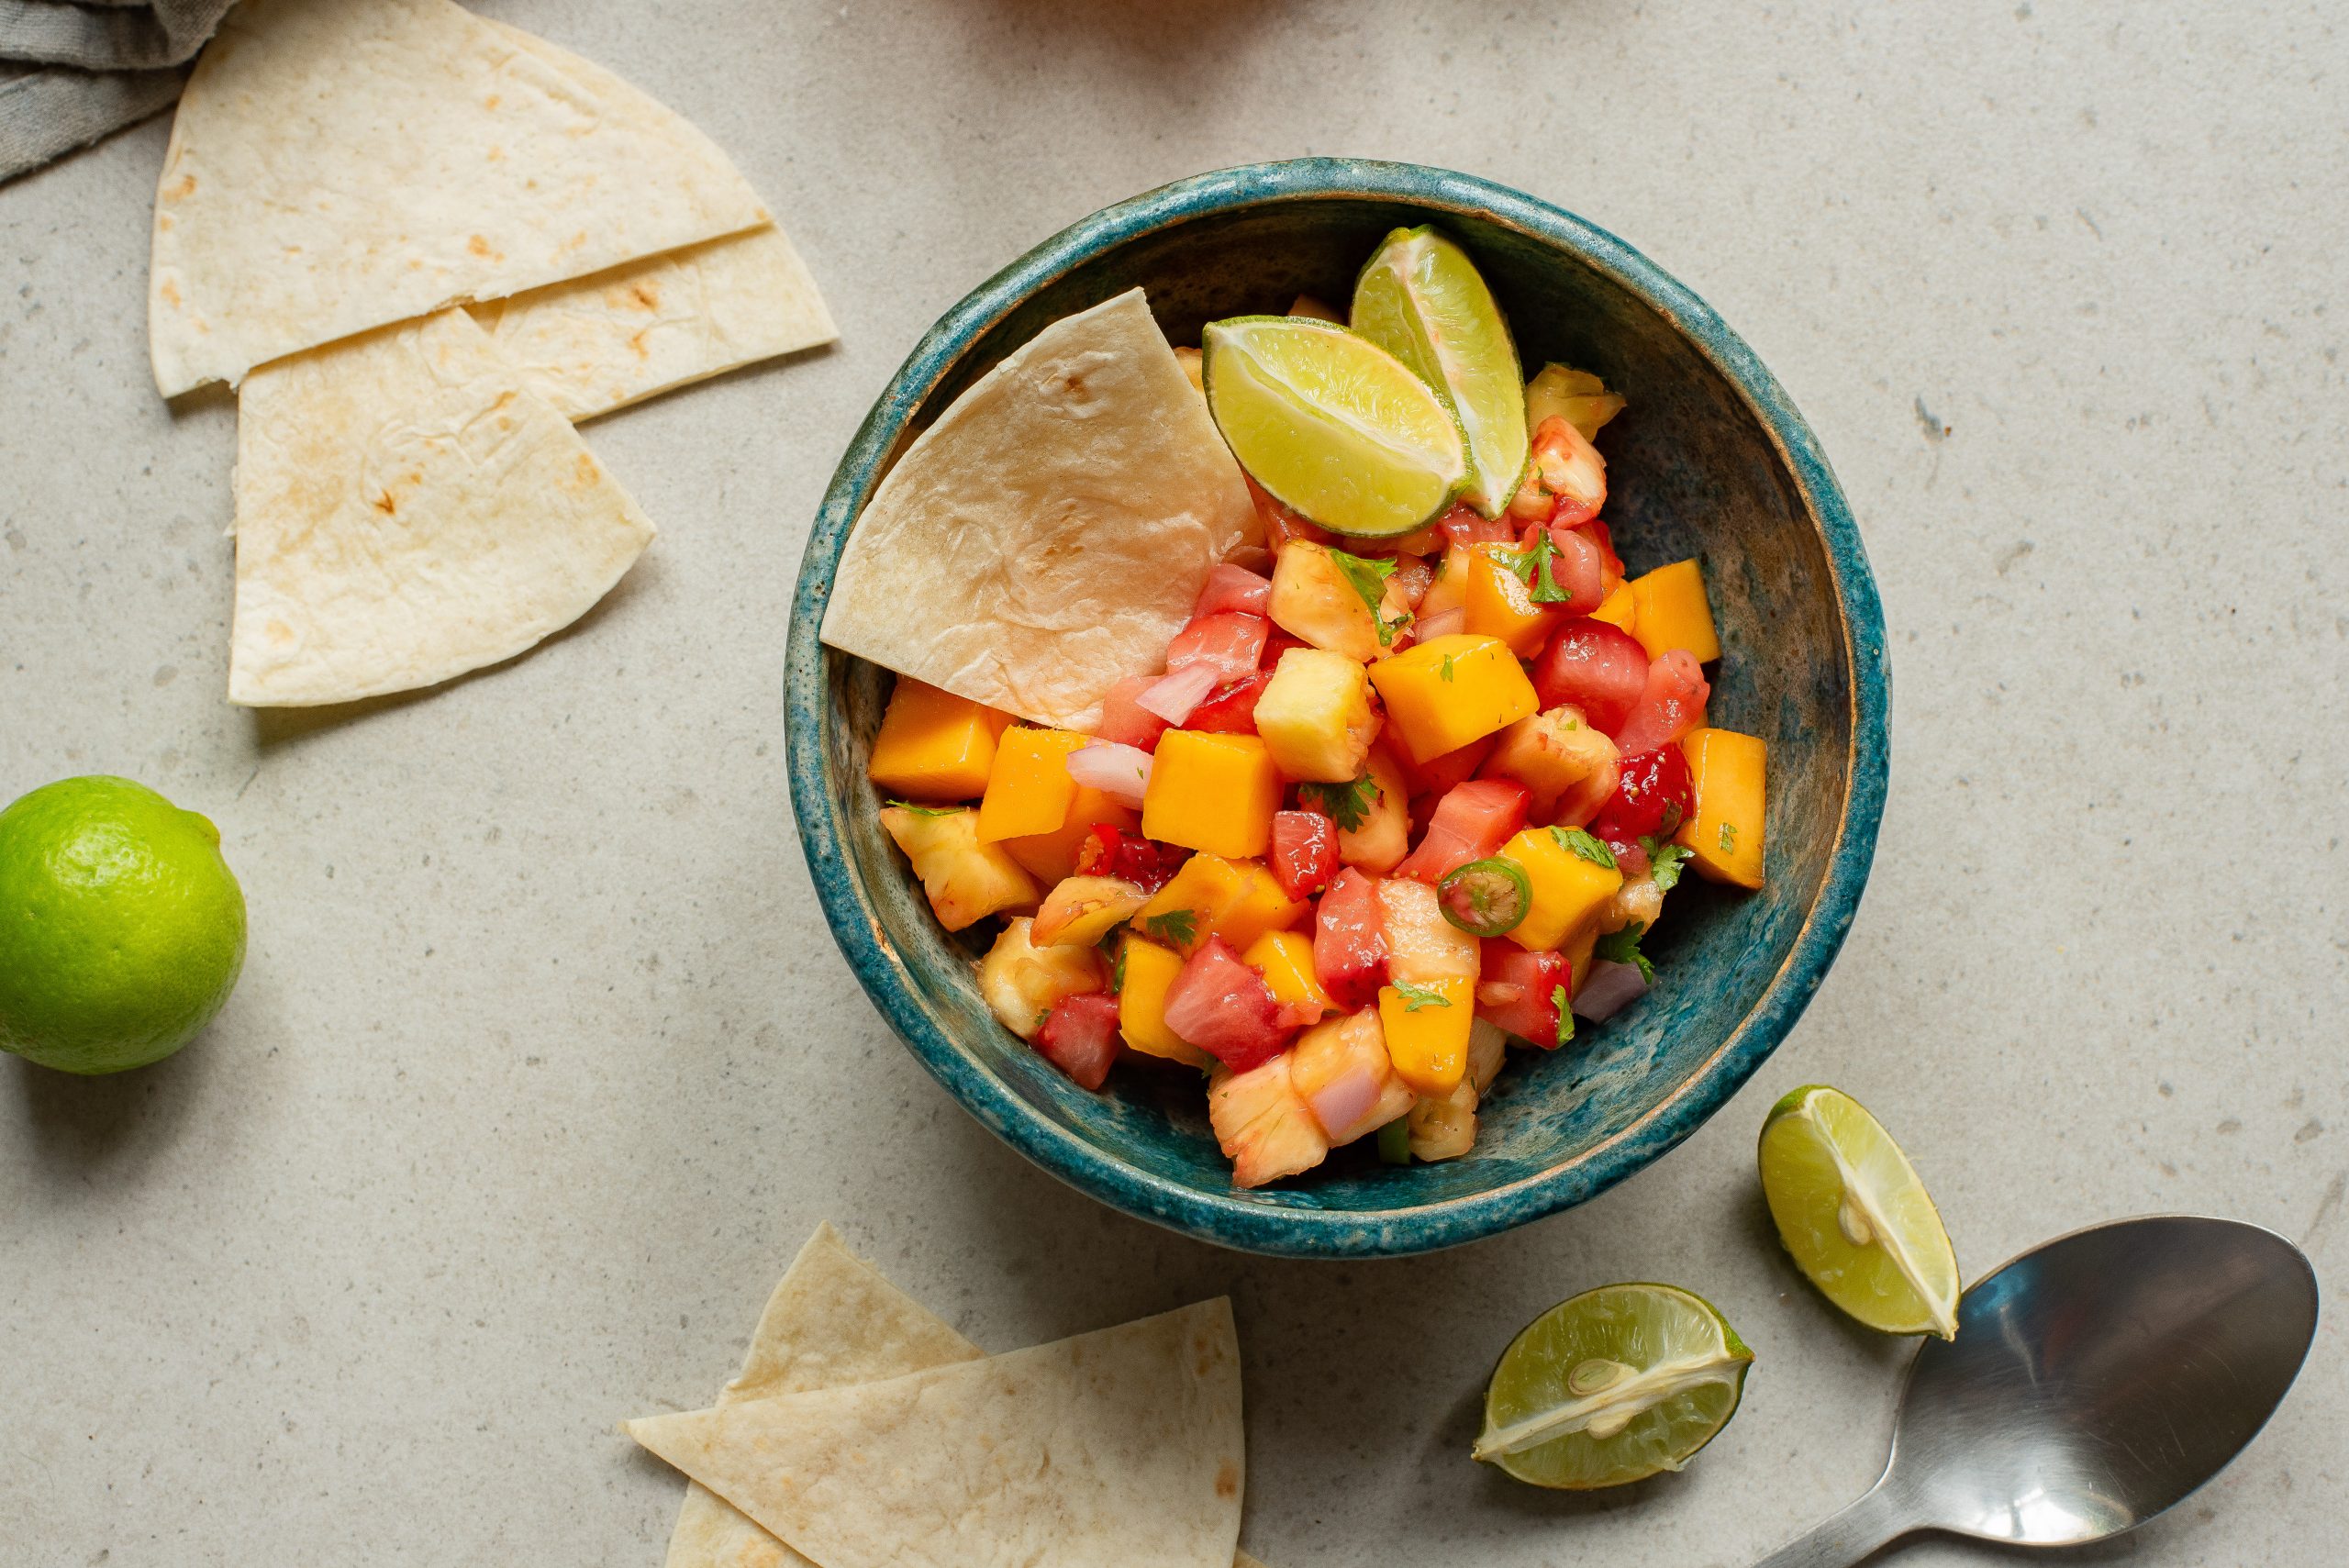 A bowl of fresh fruit salsa with diced mango, tomato, and lime, accompanied by tortilla wedges, on a neutral-toned surface.